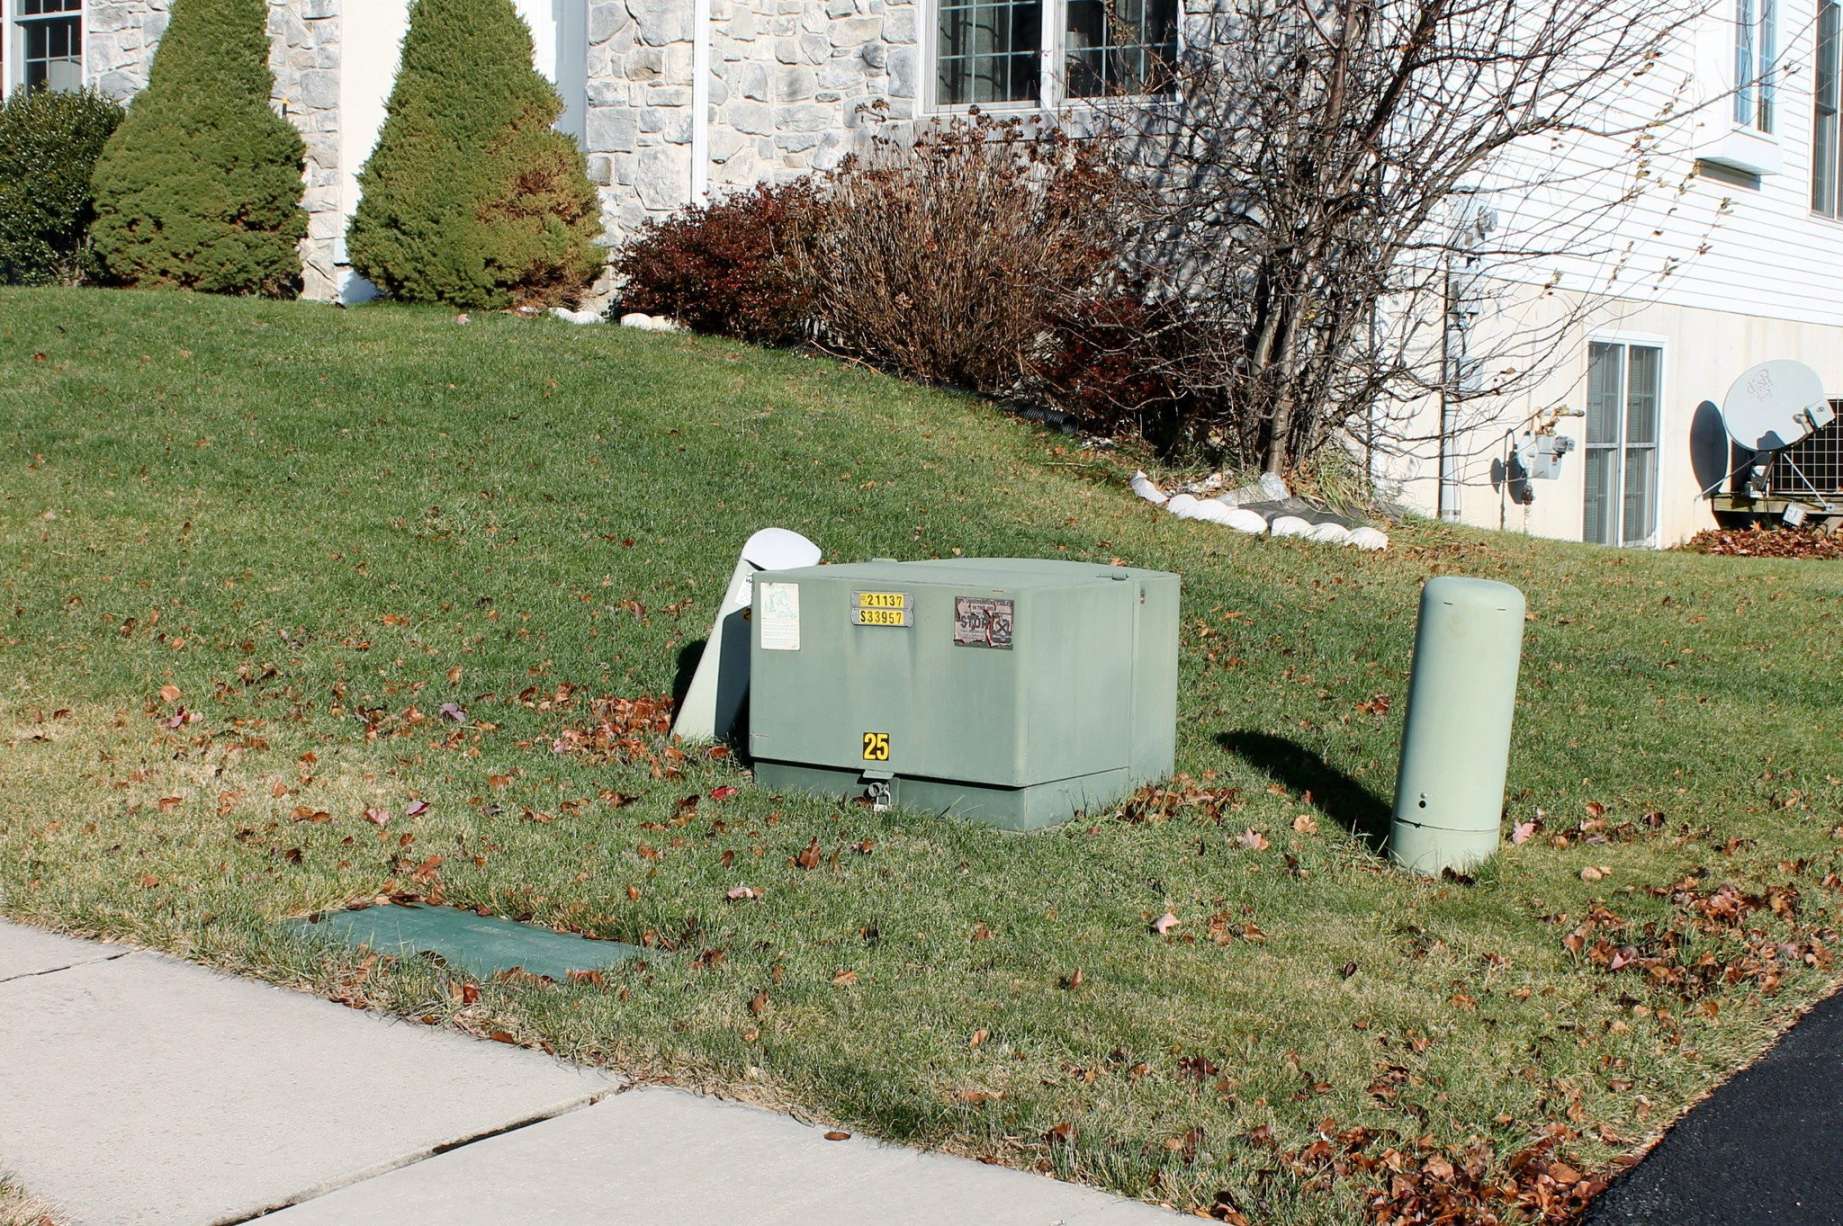 What to plant in front of a utility box: Gardening Q&A with George